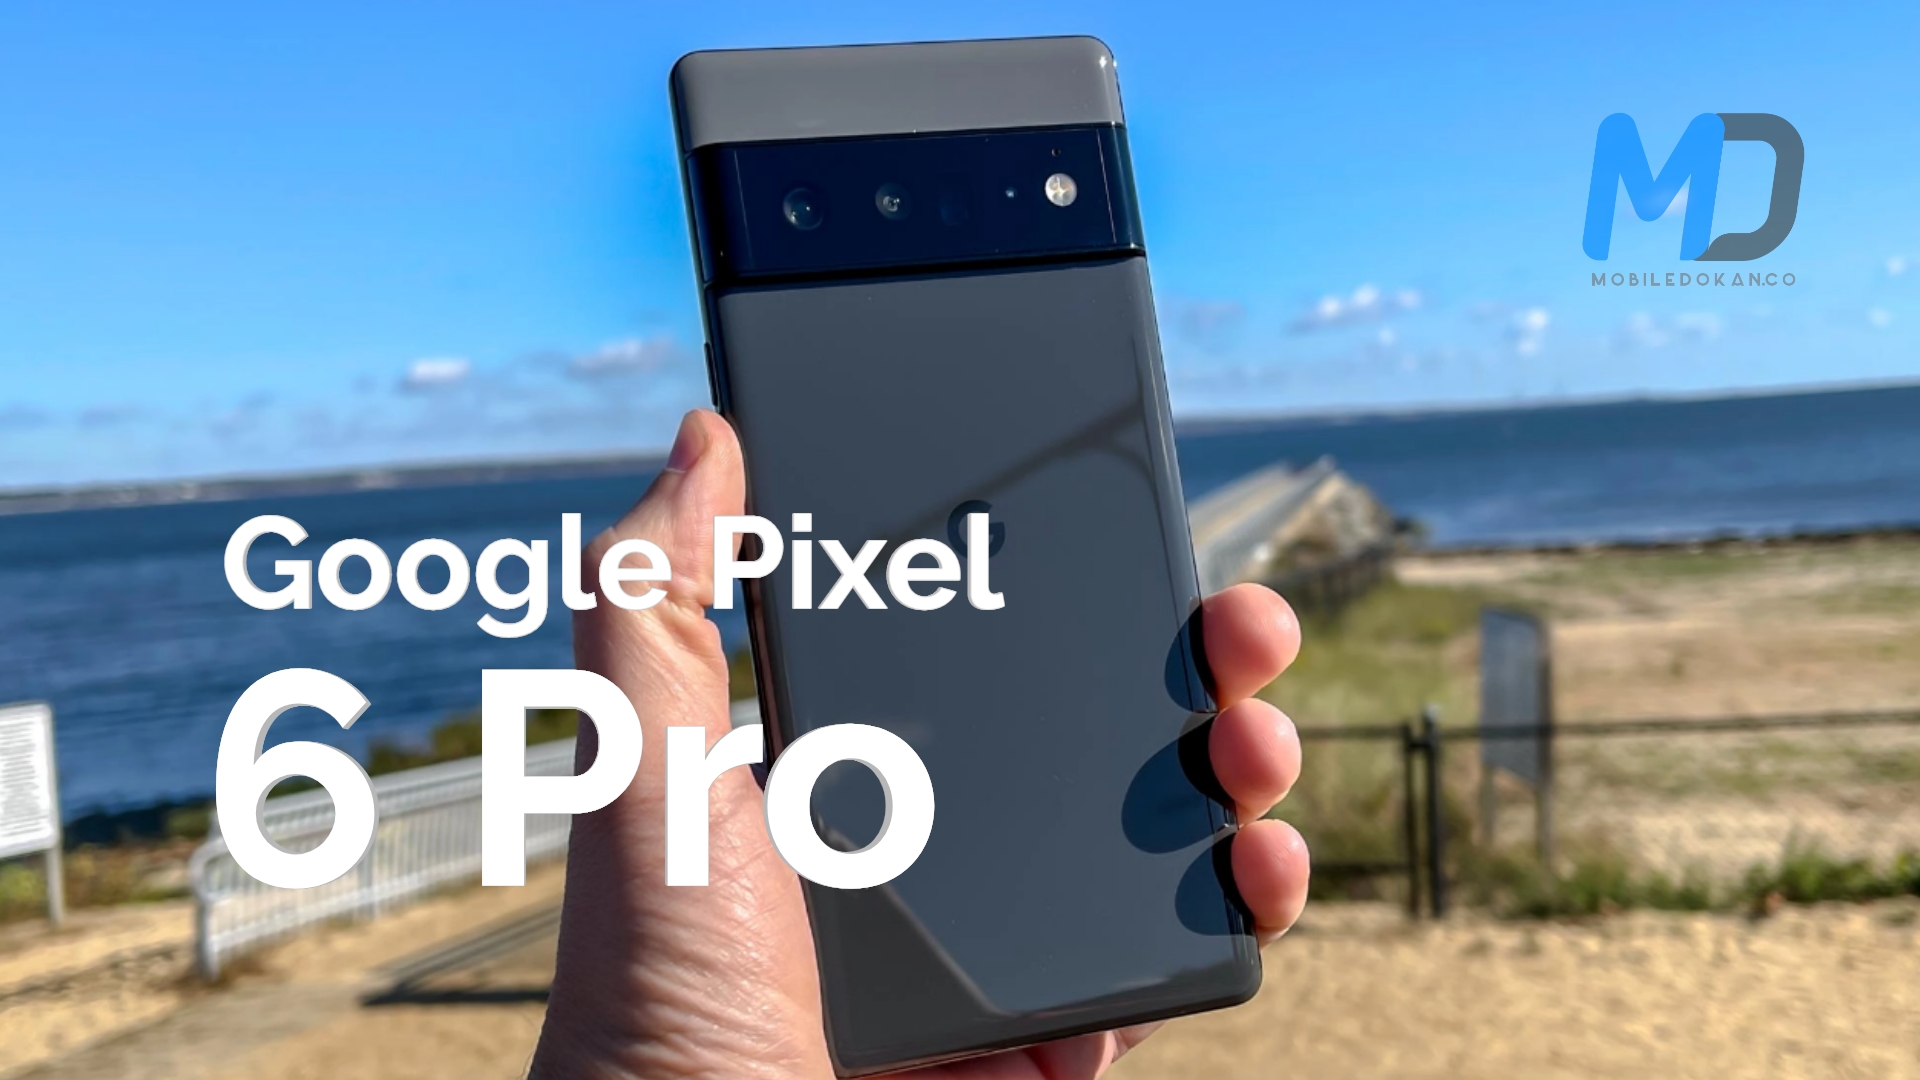 Google Pixel 6 Pro hot cake of this October 2021